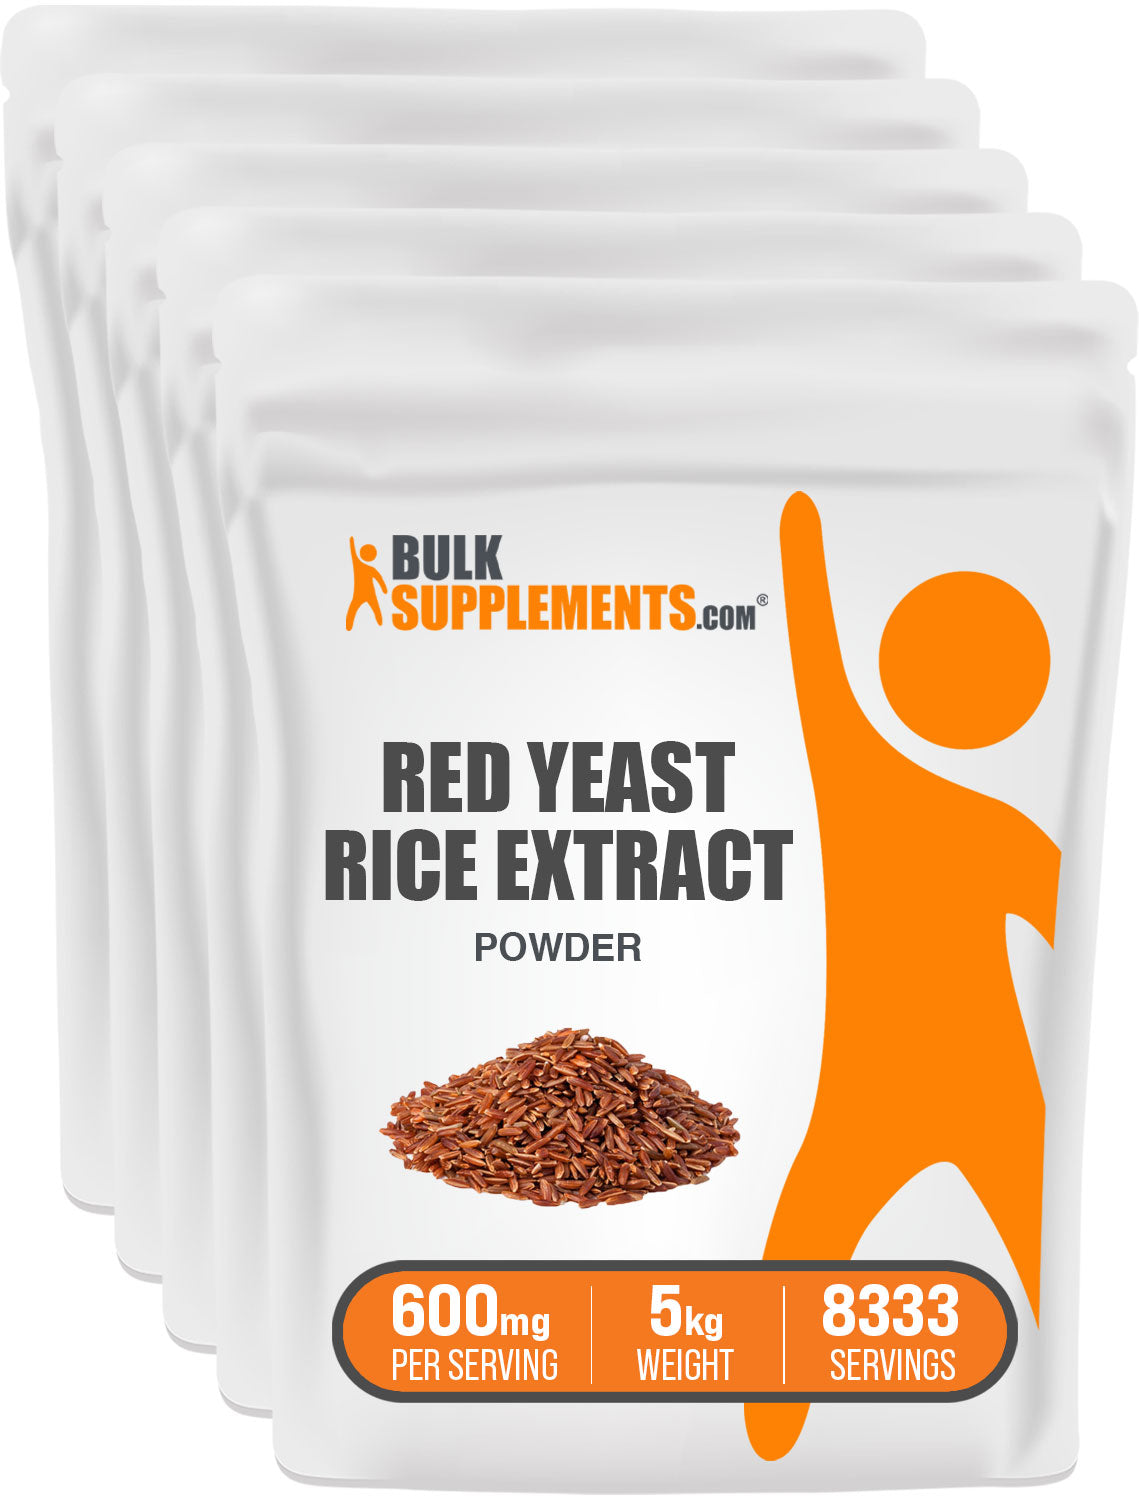 BulkSupplements Red Yeast Rice Extract Powder 5kg bag